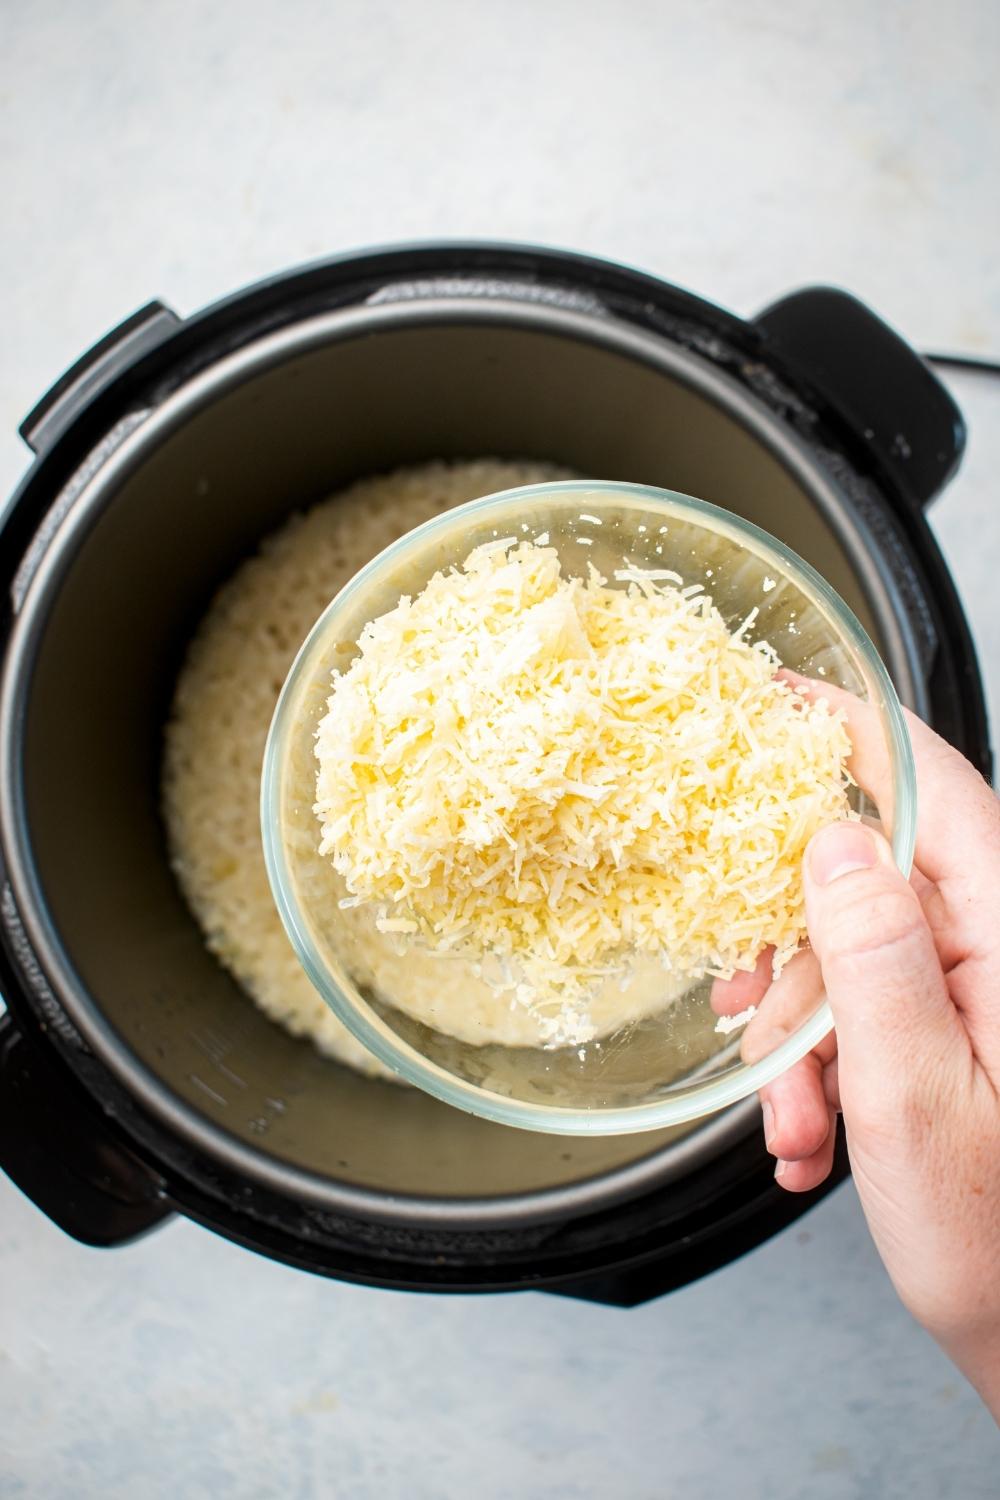 A hand holding a bowl of Parmesan cheese over an instant pot filled with risotto.